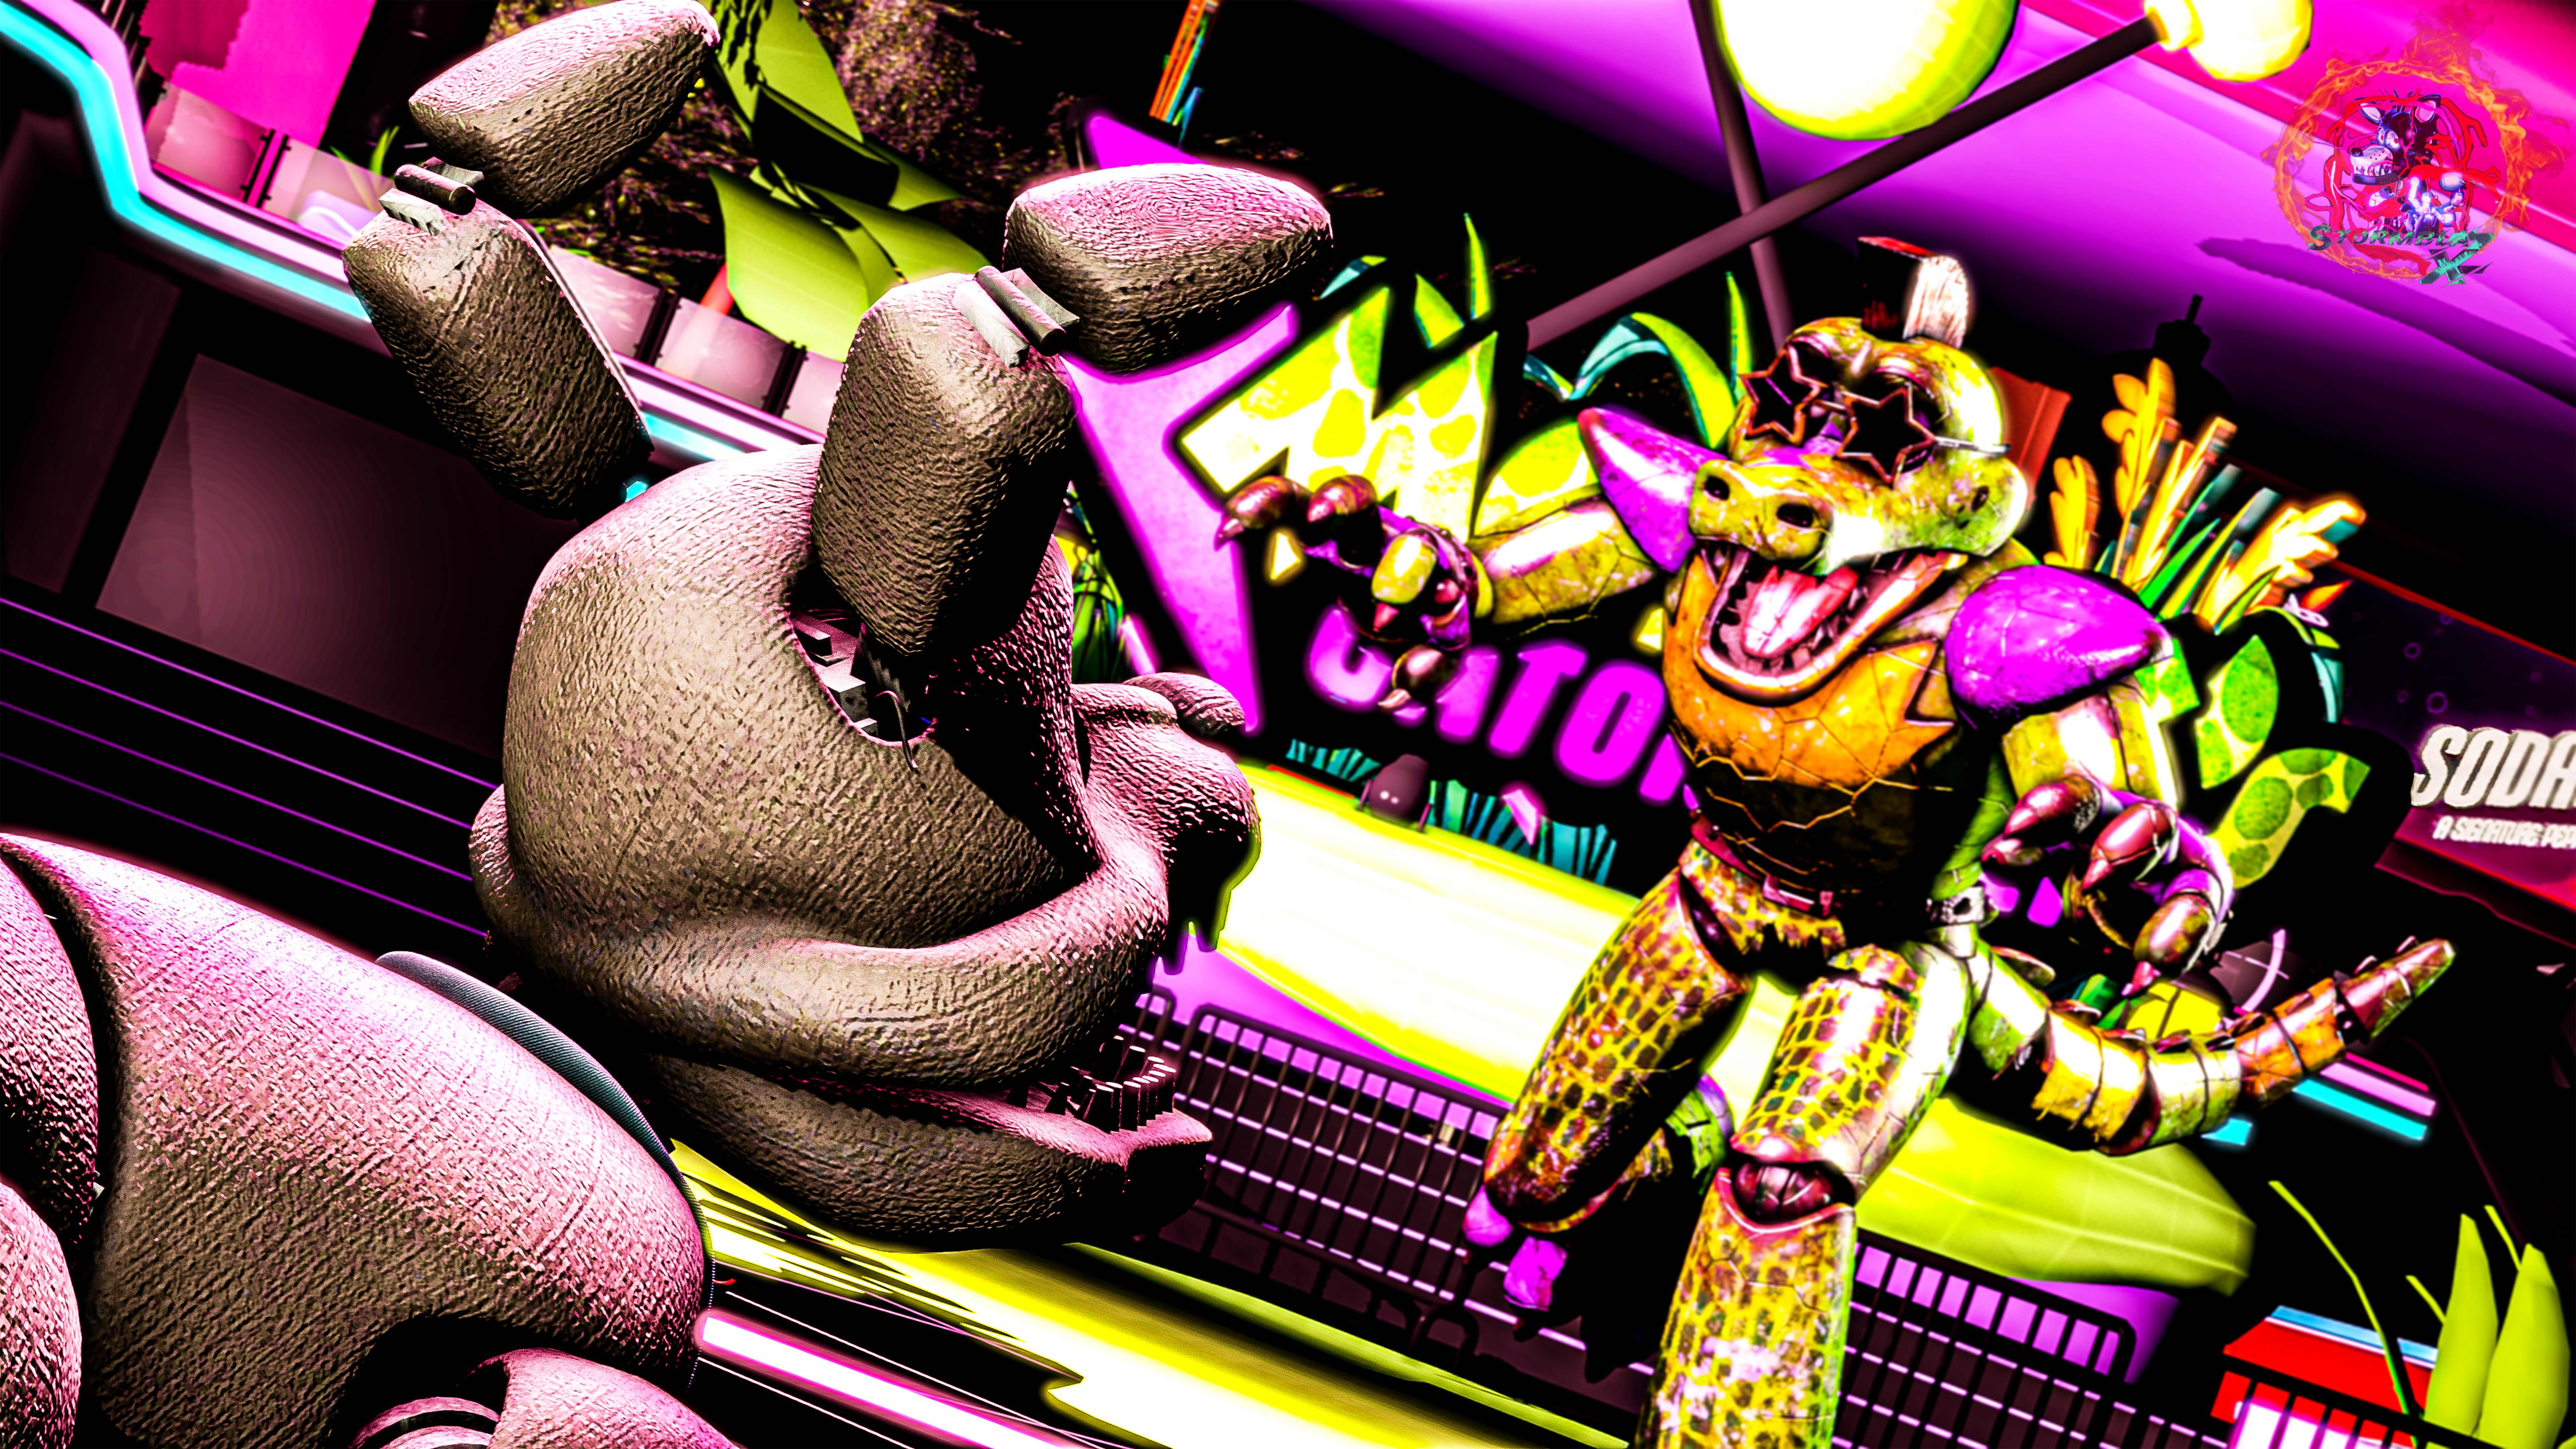 FNAF: Security Breach – Enter the Nightmare with the Thrilling New